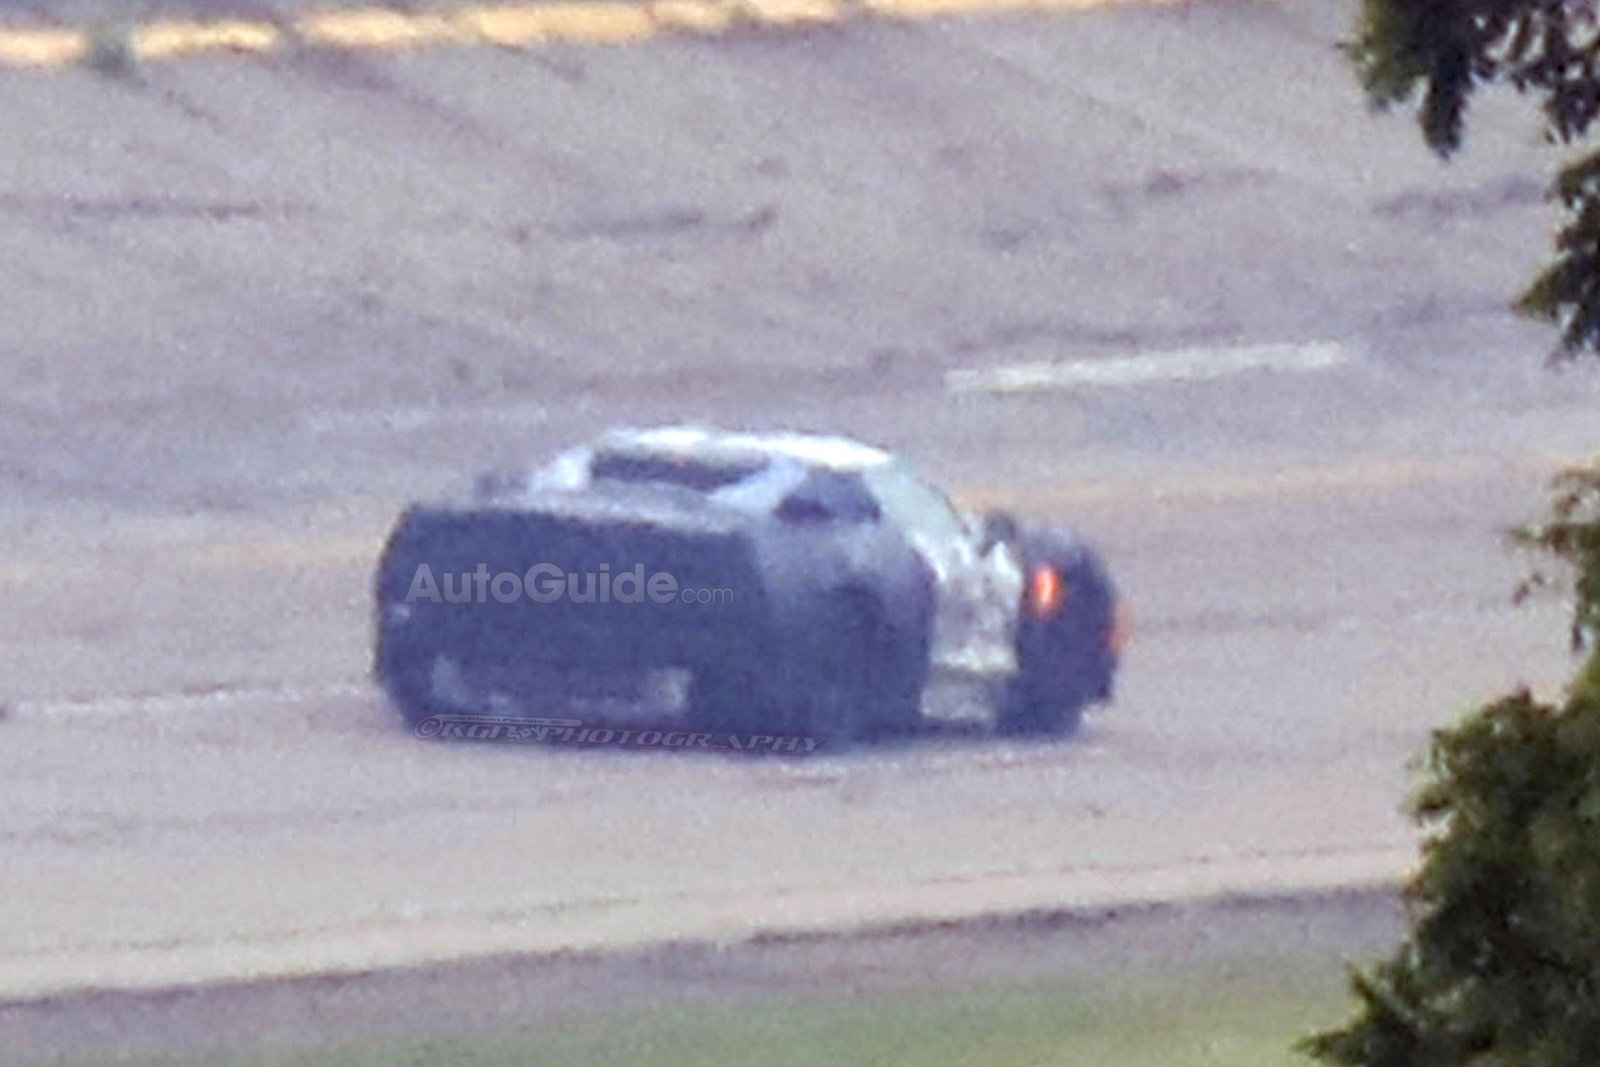 The First Ever Photos of the Mid-Engine Corvette